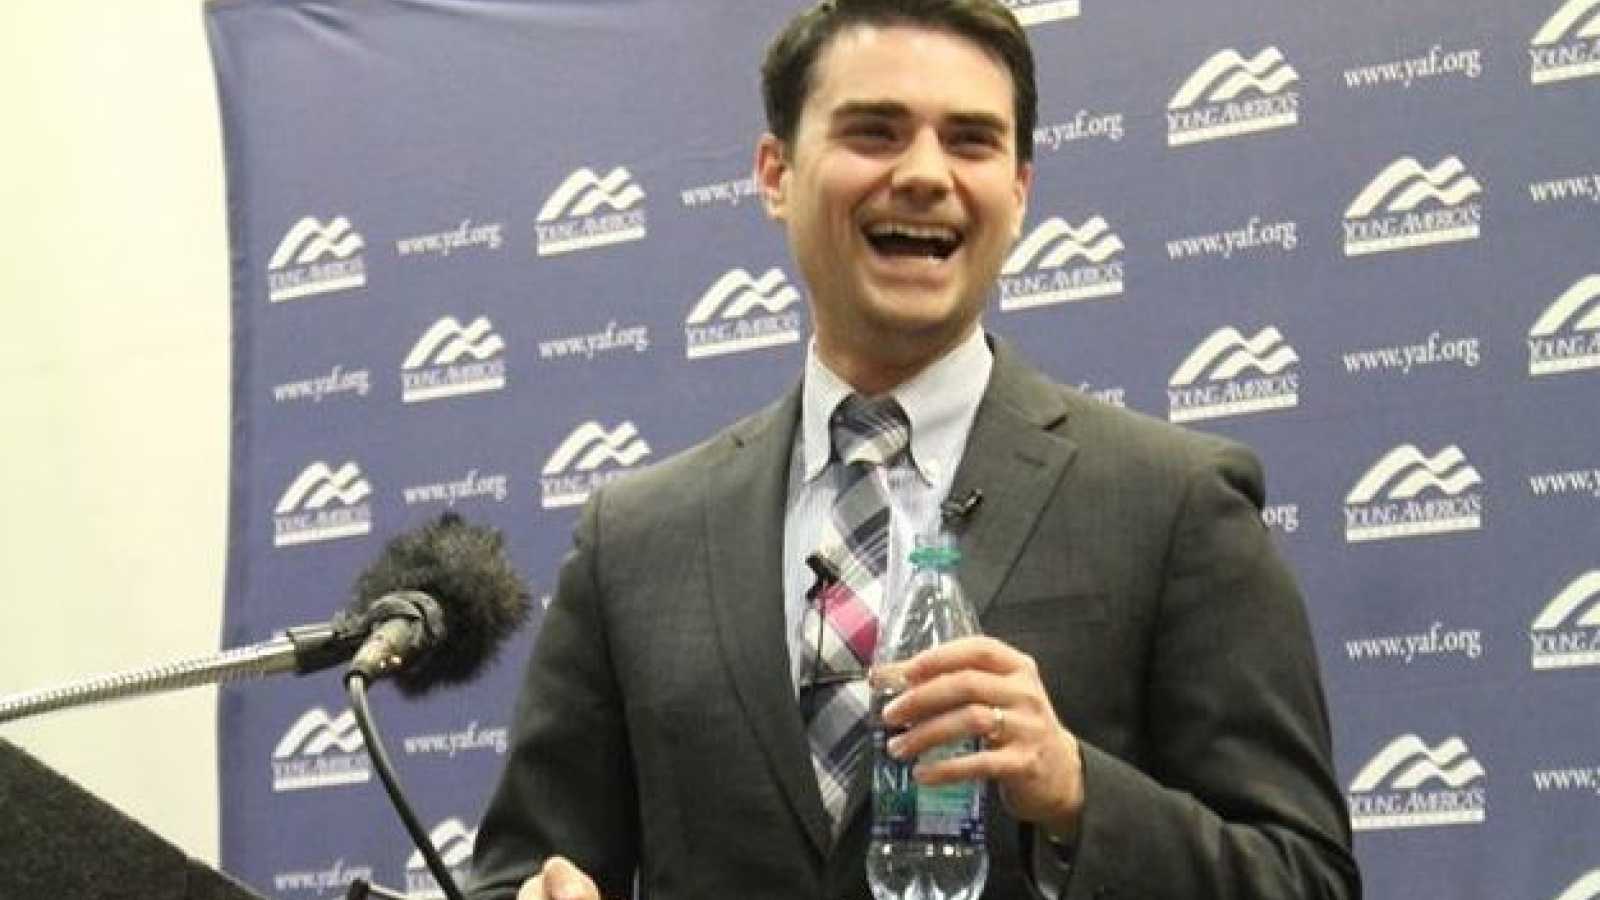 Image: Ben Shapiro brilliantly explains why transgenderism is a make believe illusion invented by liberals